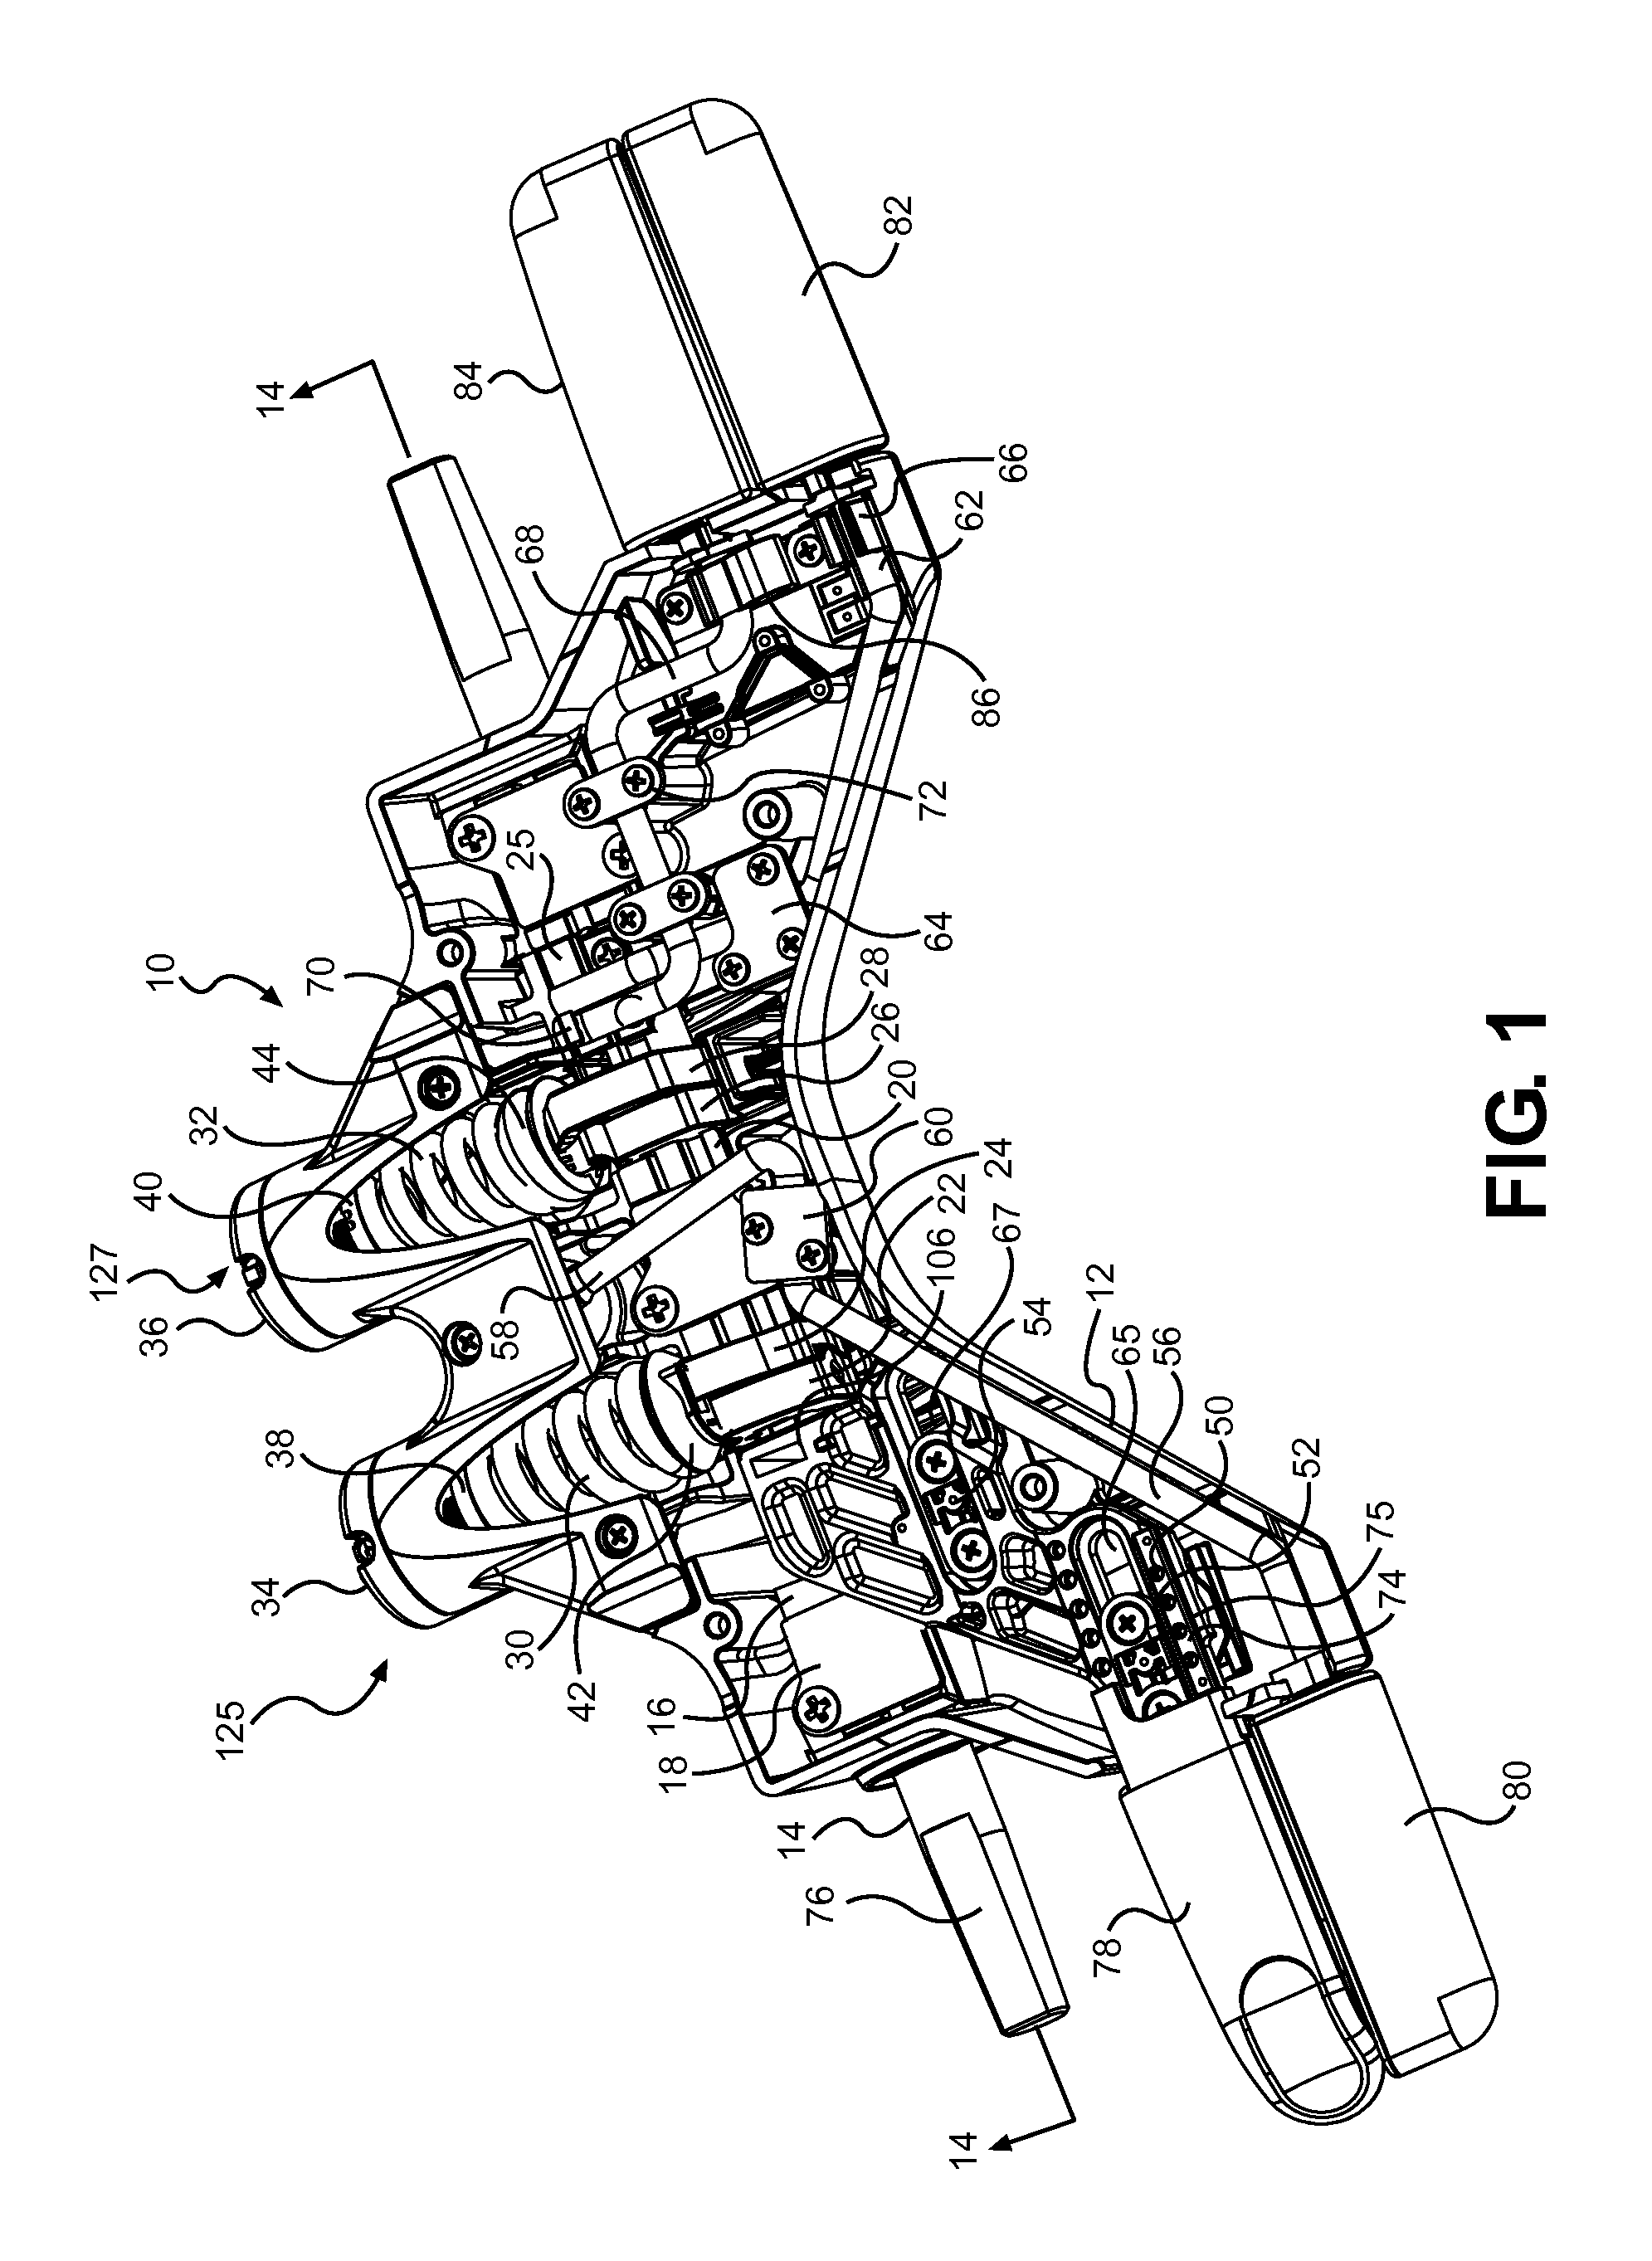 Mobile Task Chair and Mobile Task Chair Control Mechanism with Adjustment Capabilities and Visual Setting Indicators